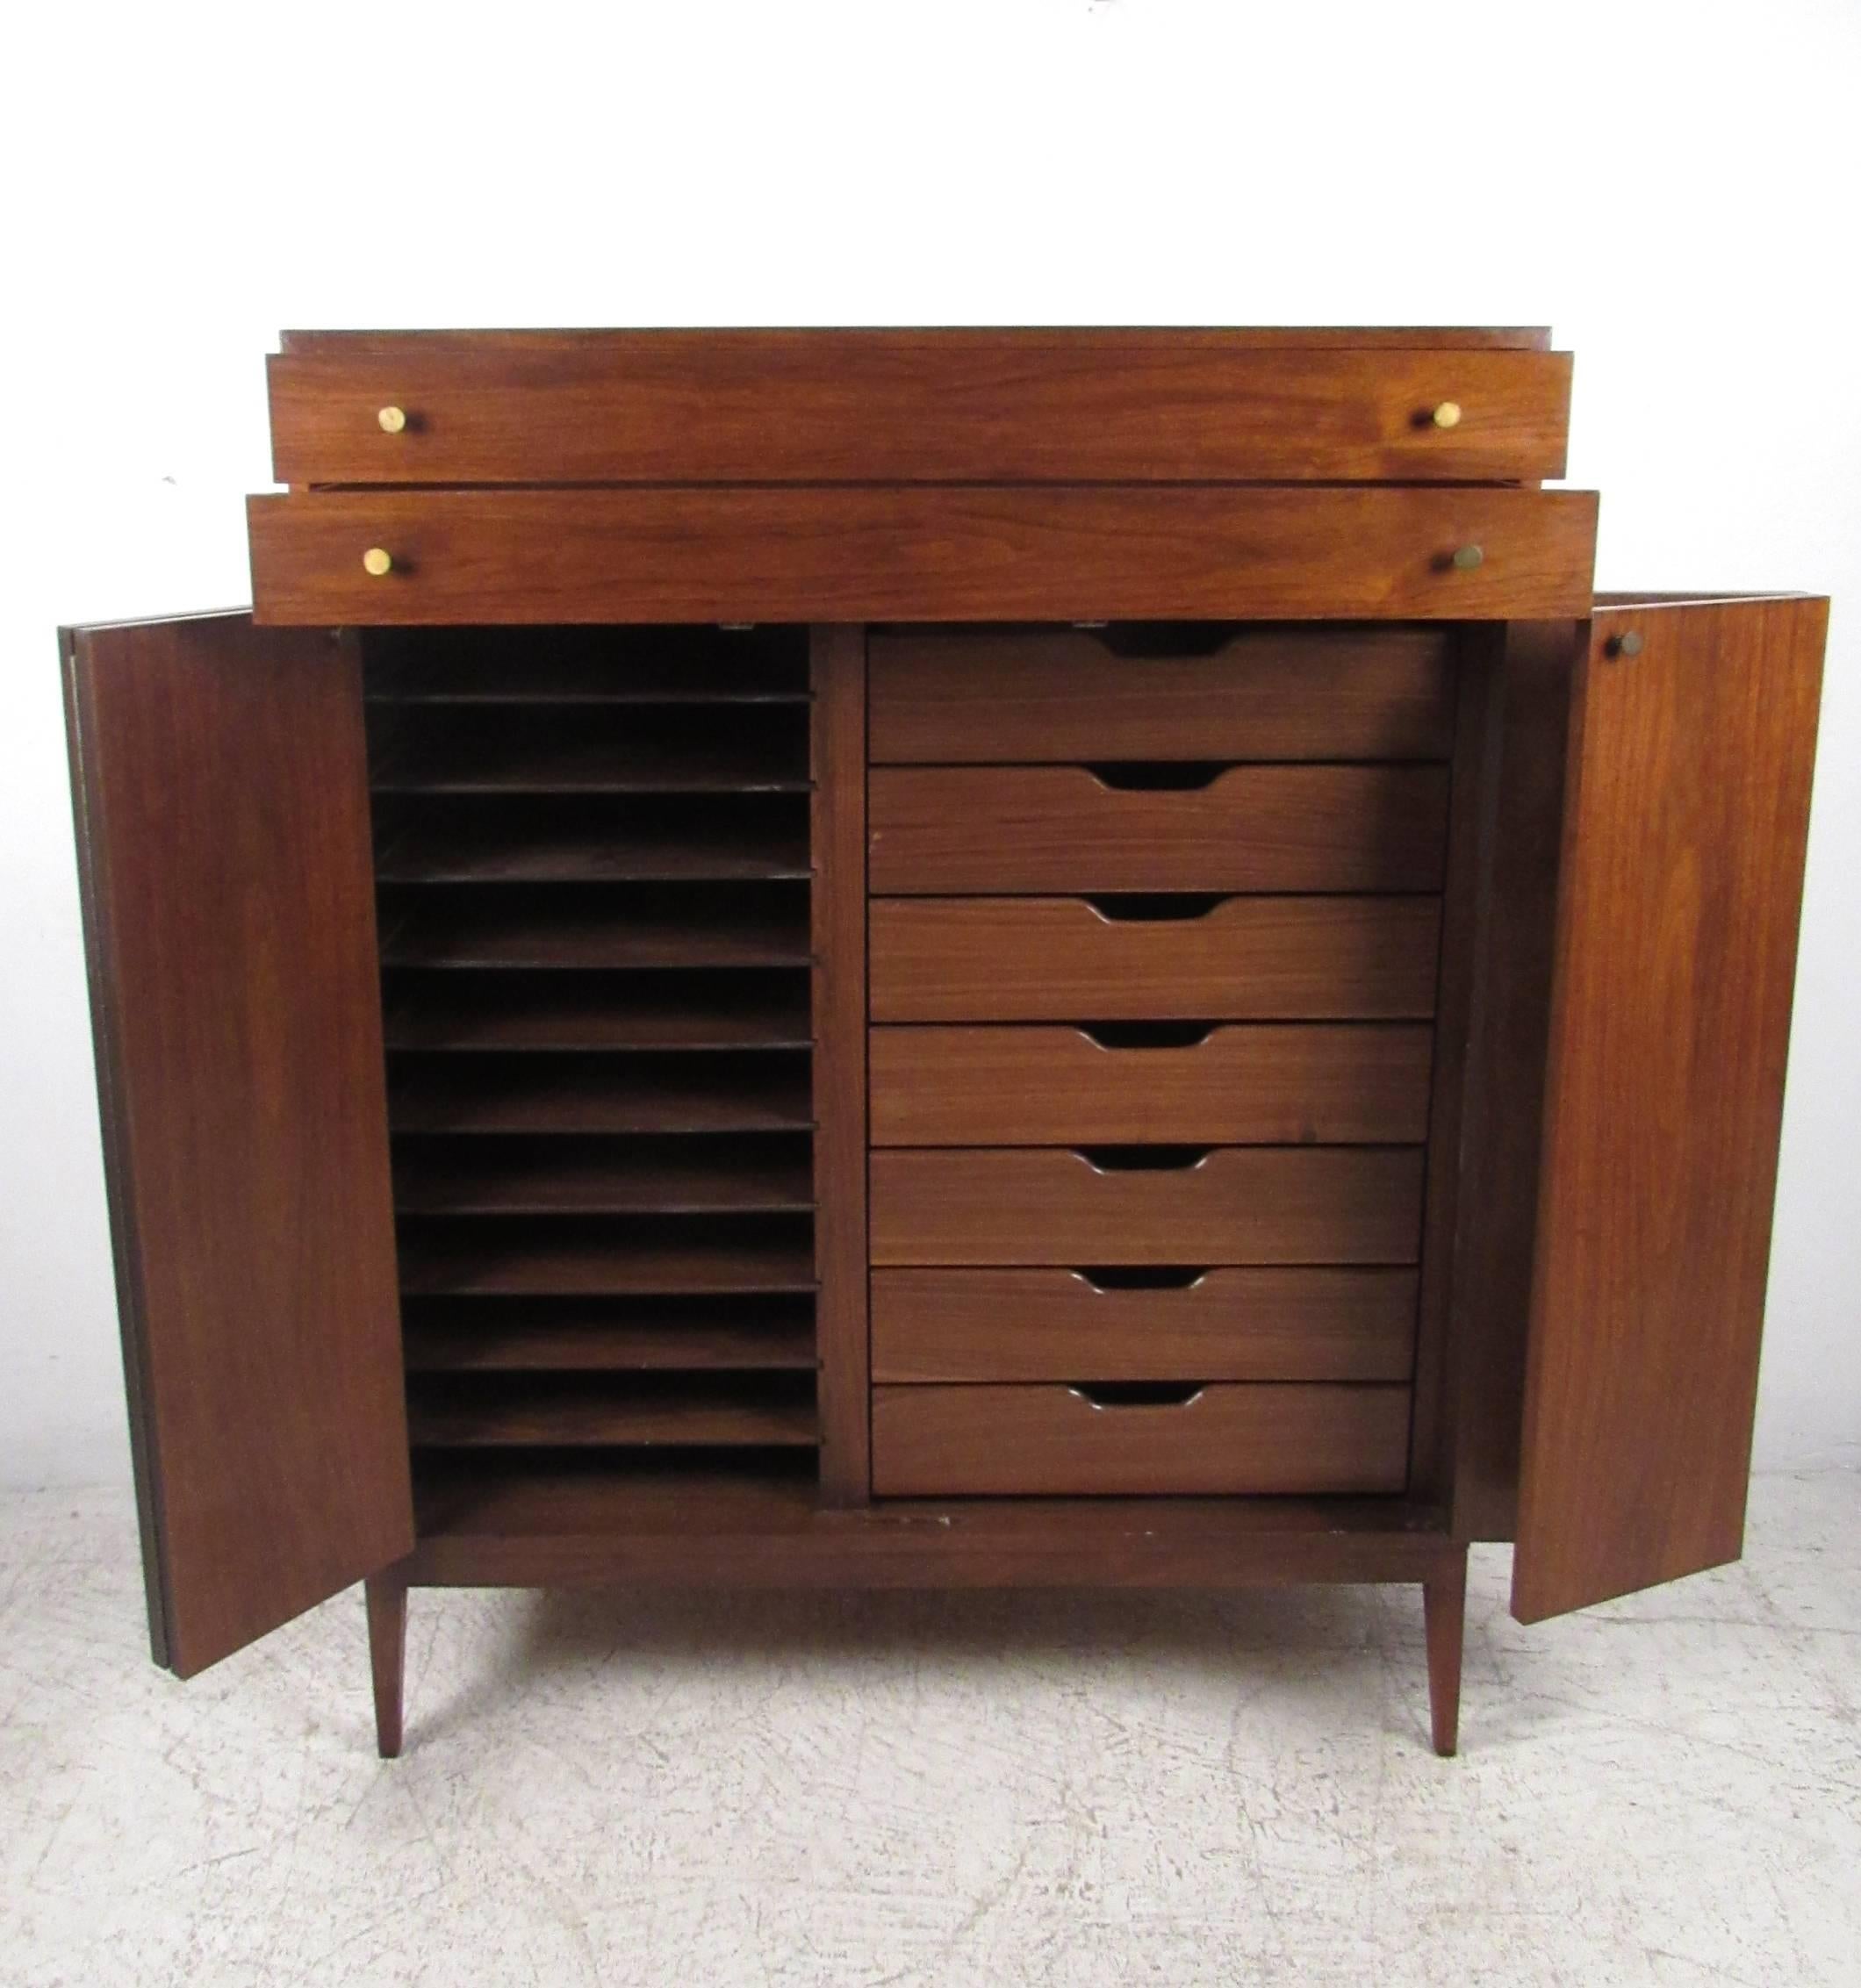 This exquisite vintage chest offers plenty of storage options, allowing for optimal organization. Unique tapered legs, vintage brass pulls and a fantastic original design make this a wonderful addition to any interior. Please confirm item location